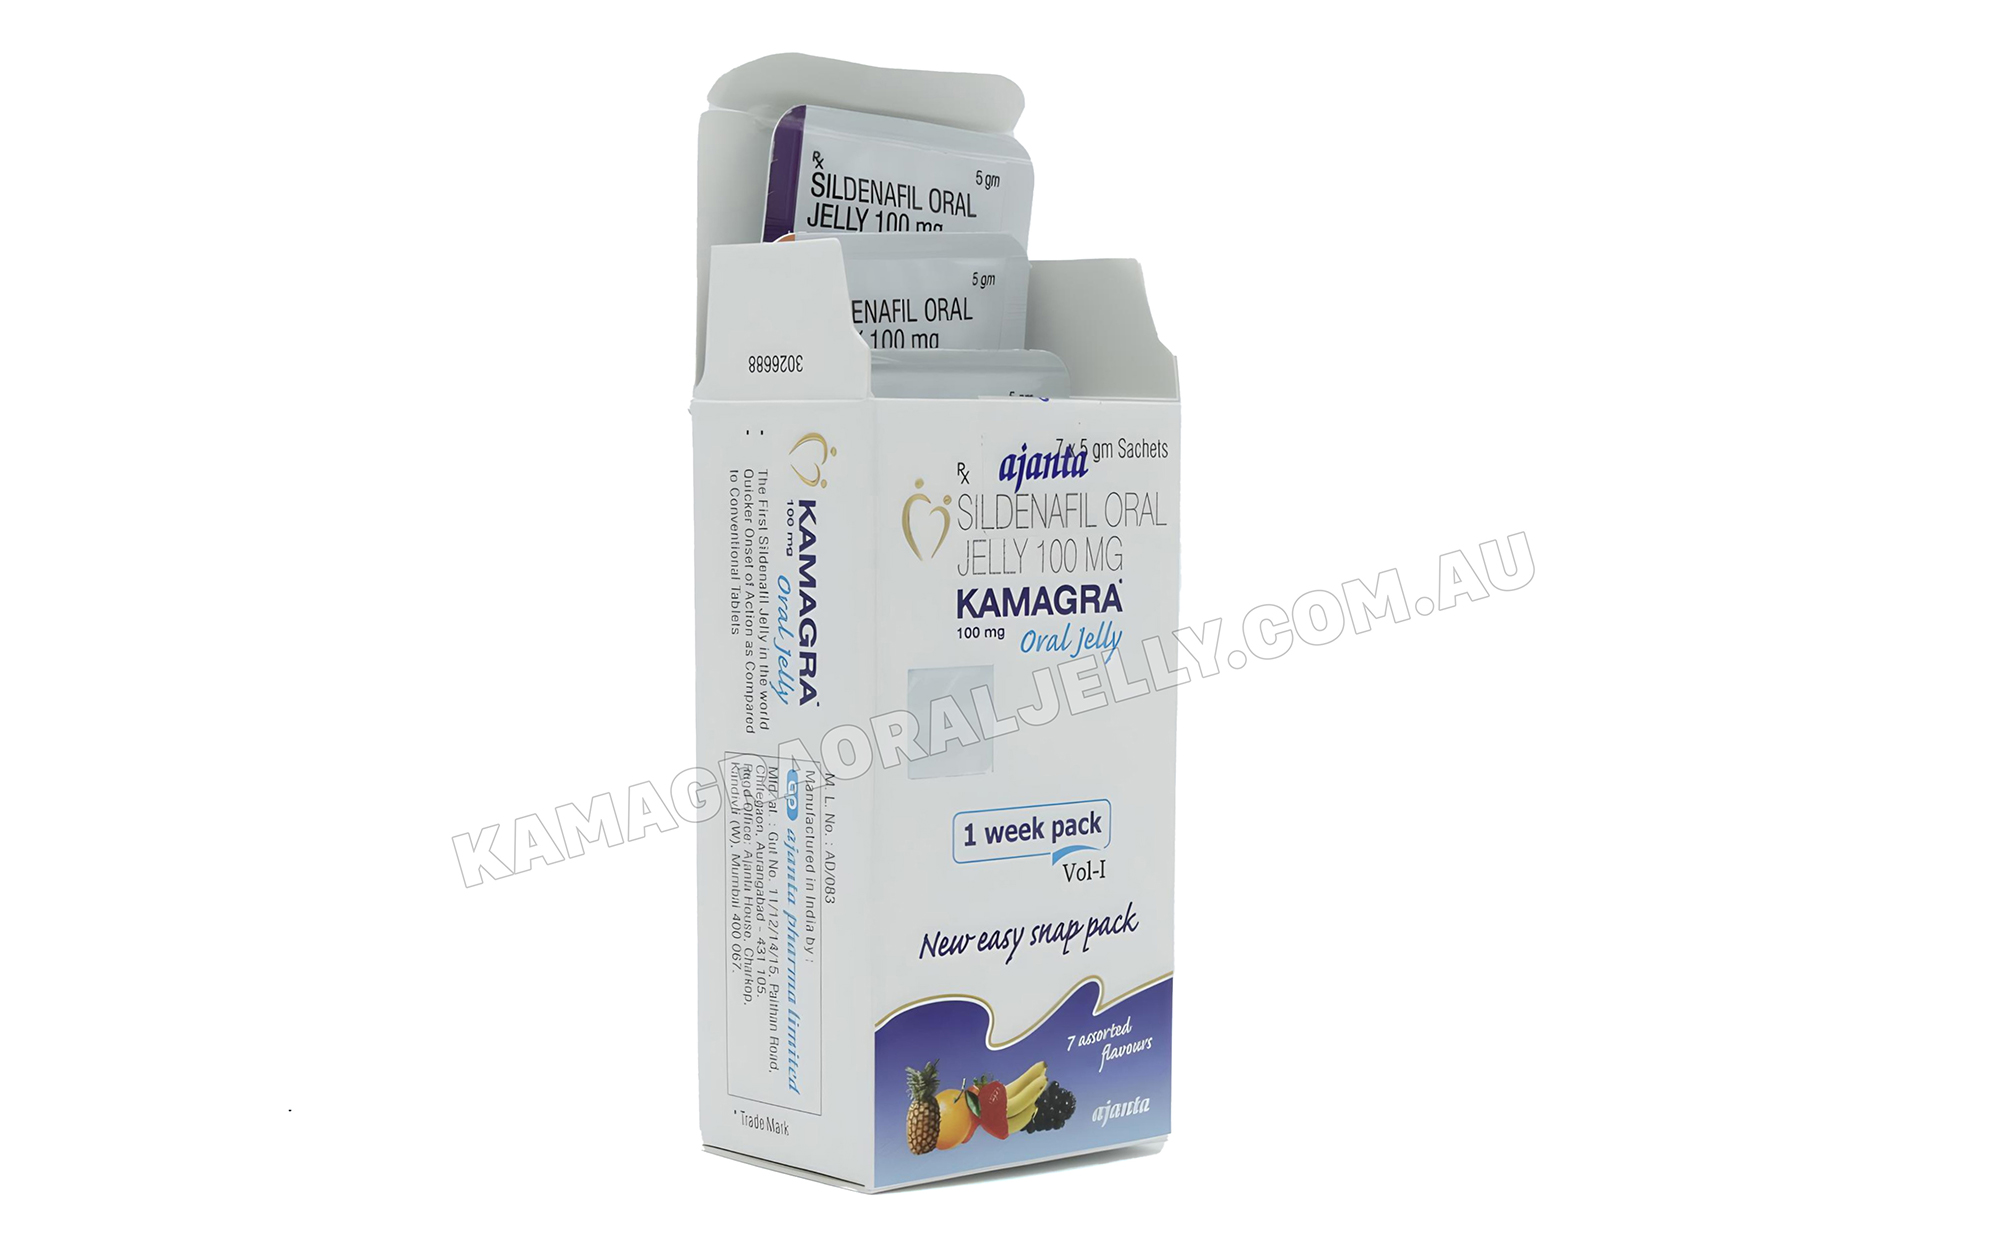 Uses of Kamagra Oral Jelly